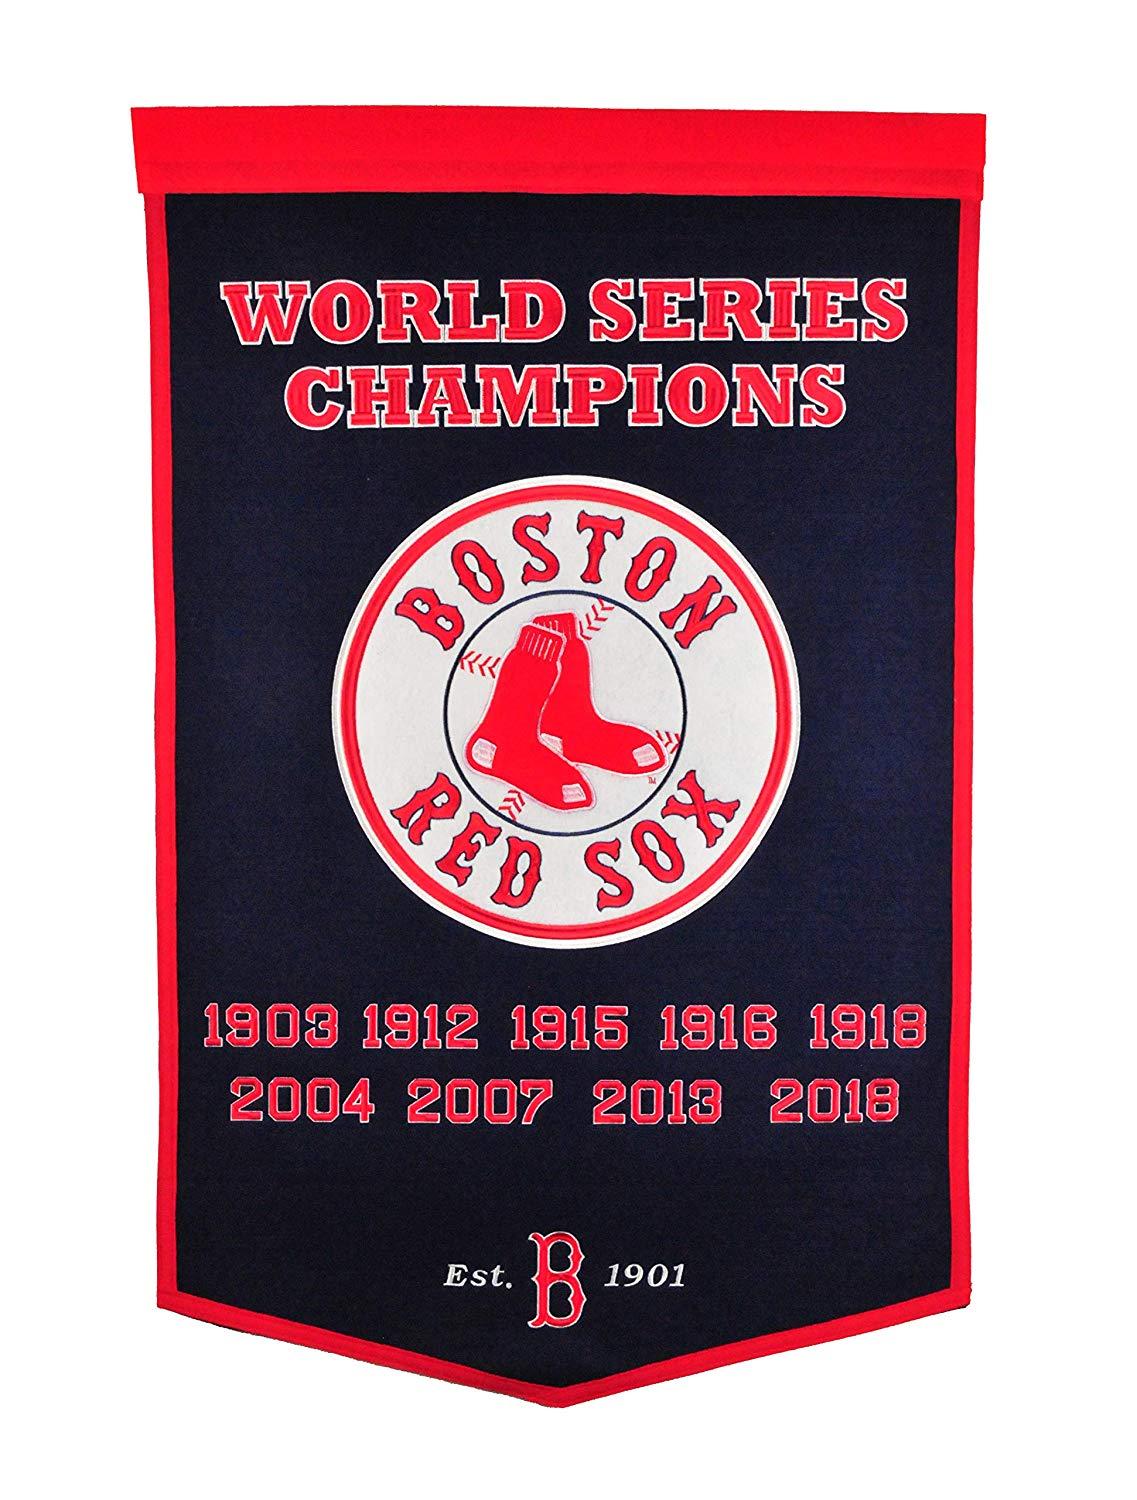 Red Sox Championship Logo - Boston Red Sox Dynasty Banner with 2018 World Series Championship at